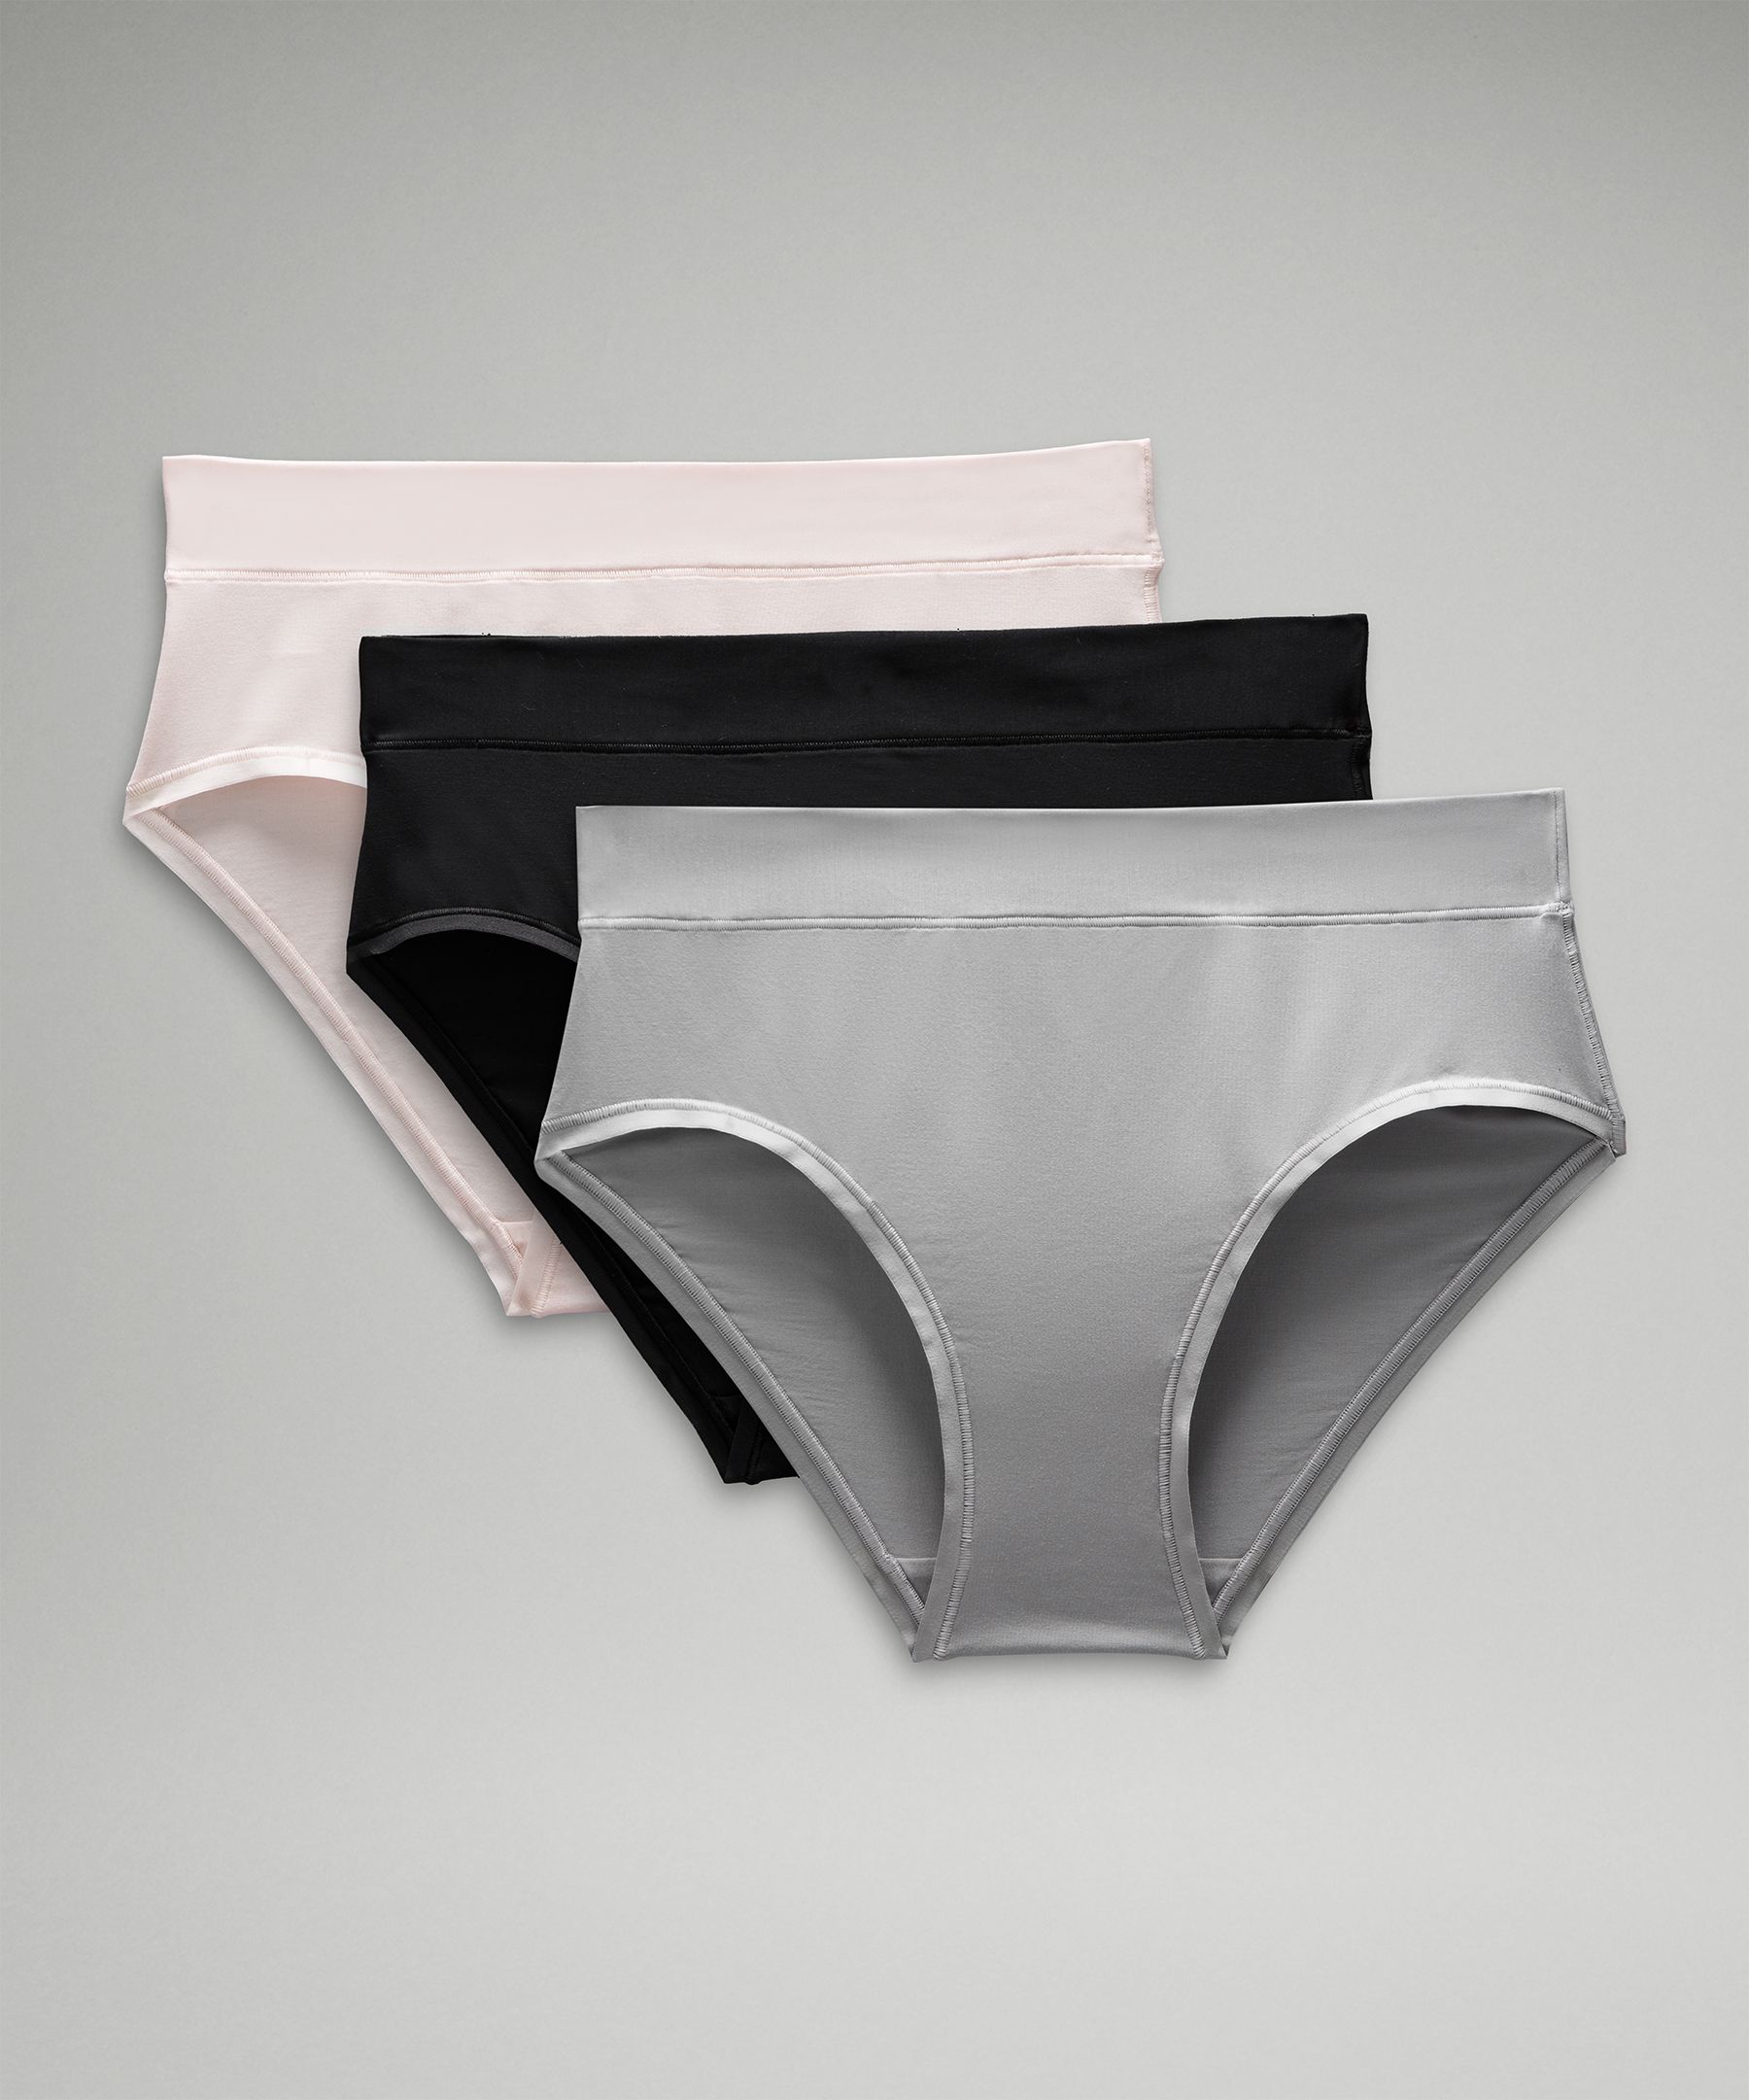 Lululemon Womens Underwear Best Sellers - Up To 60% OFF Now